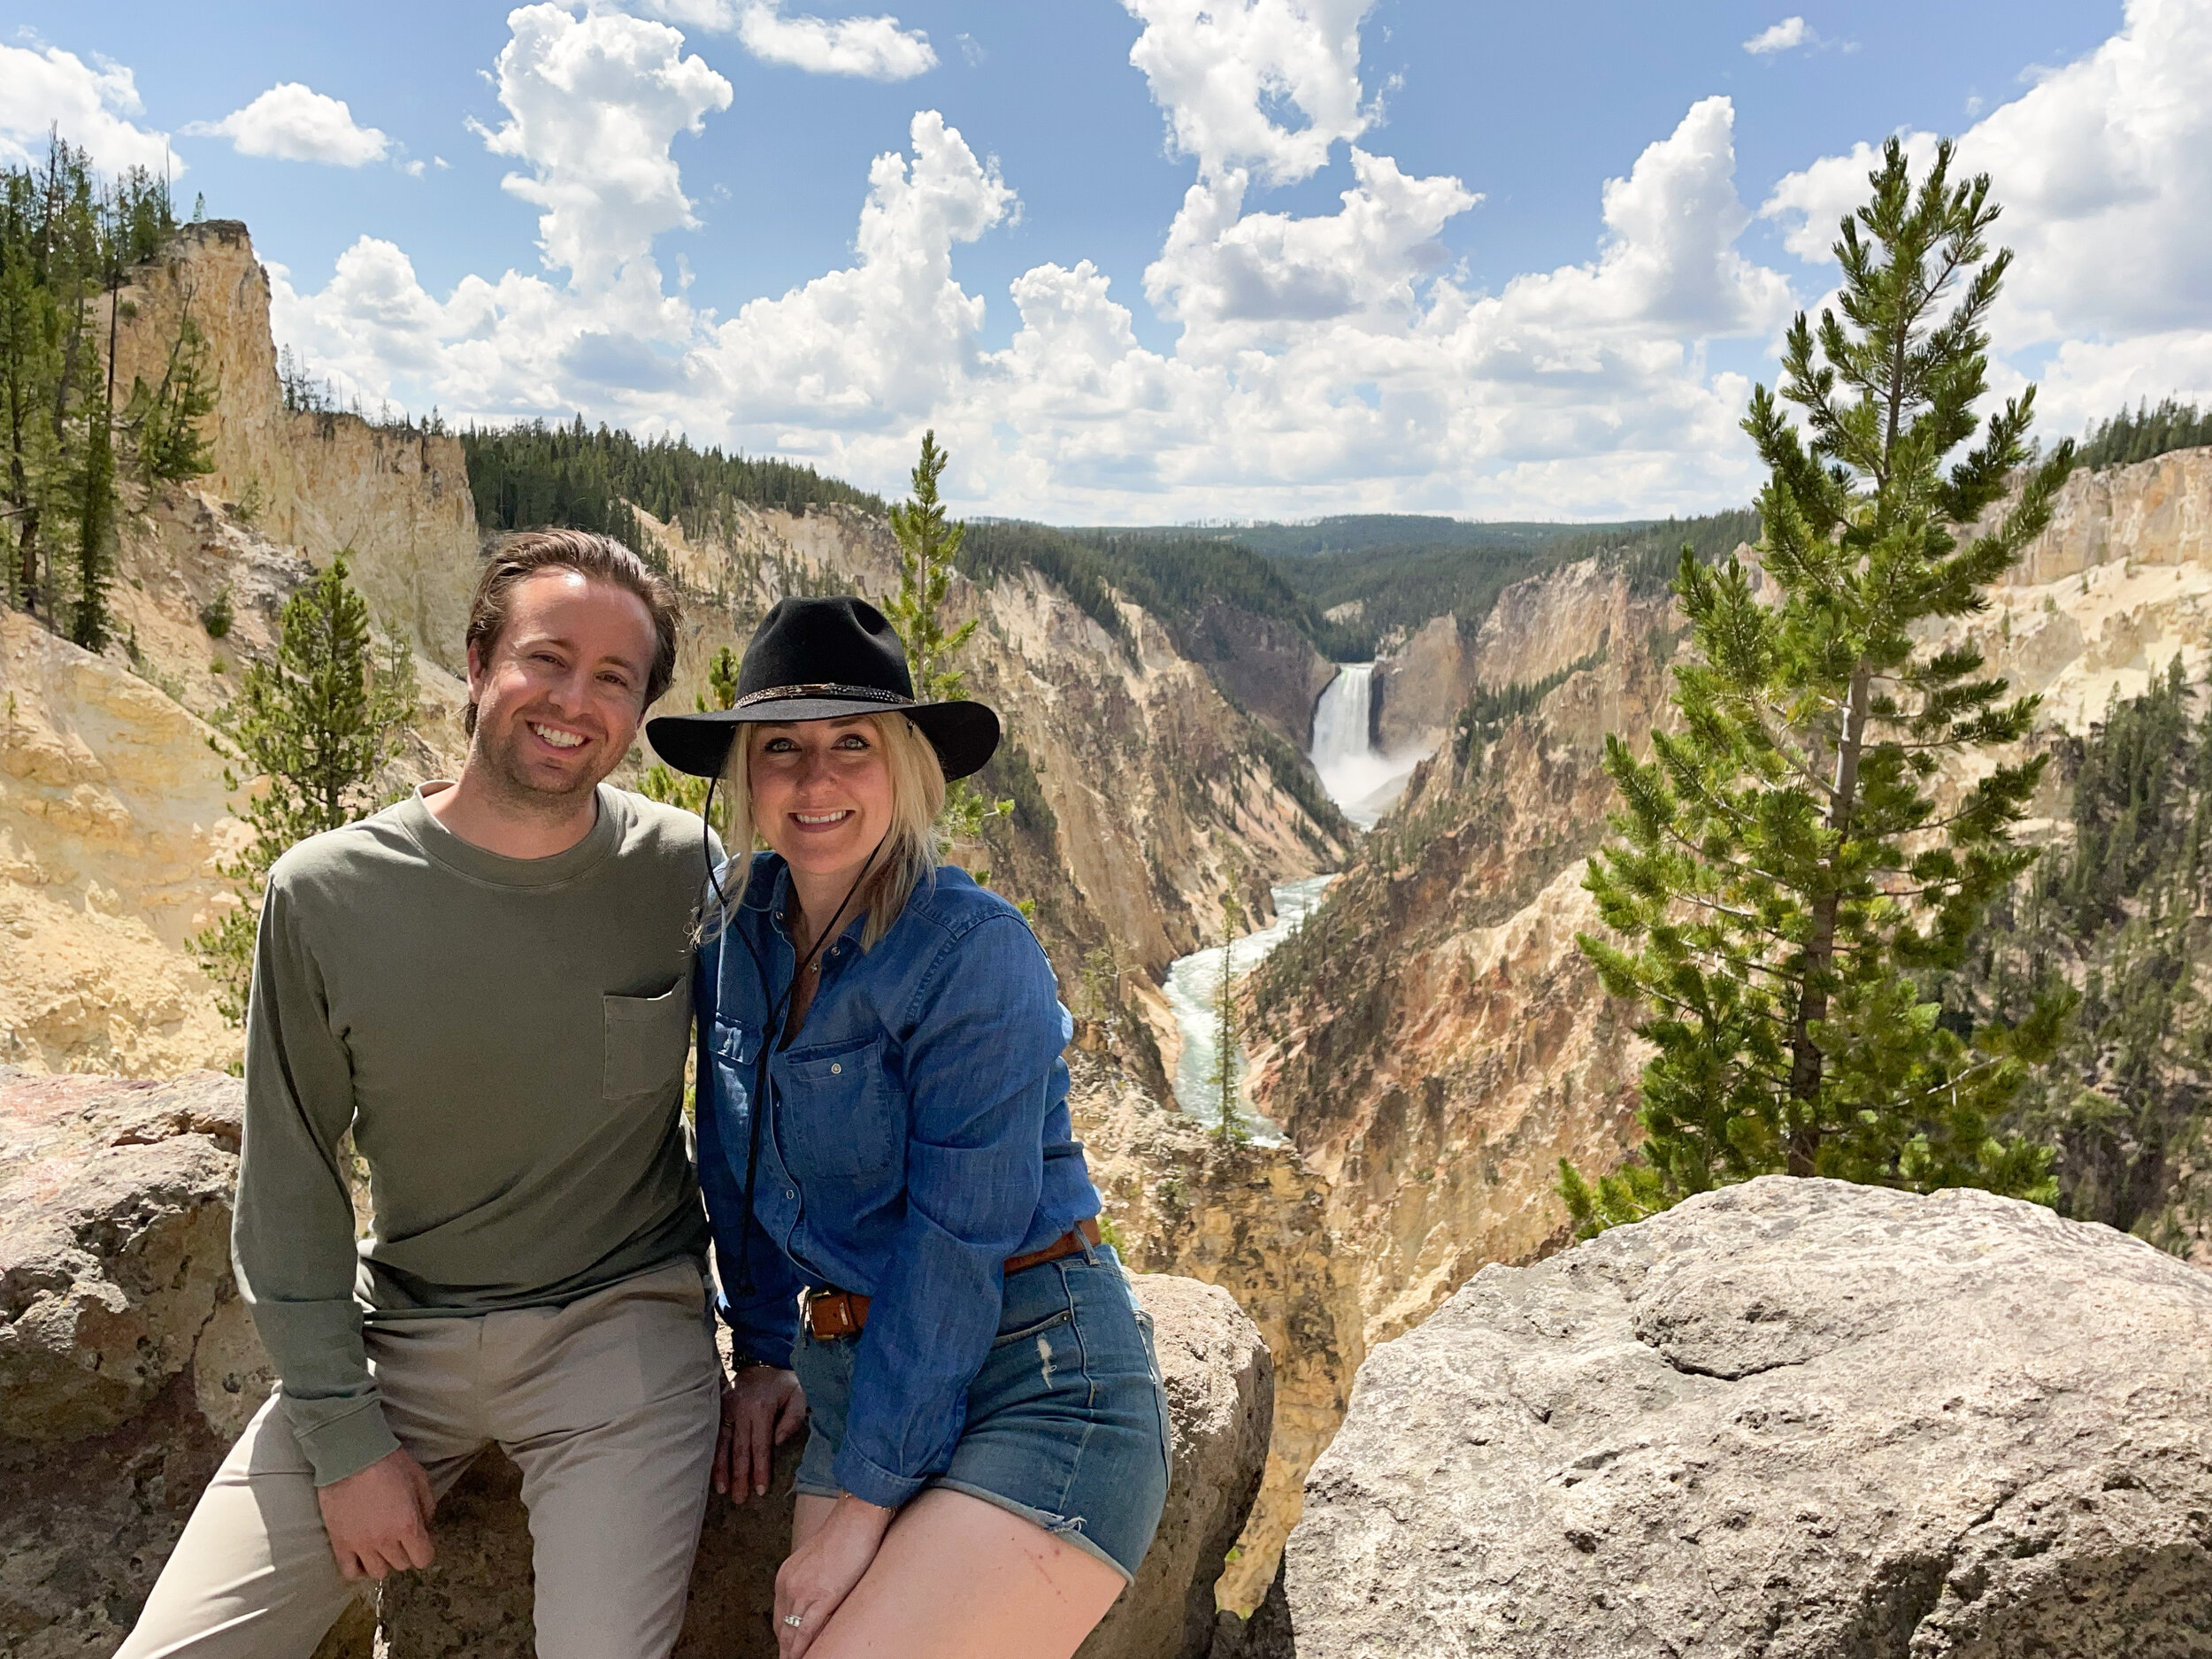 Greetings from Yellowstone